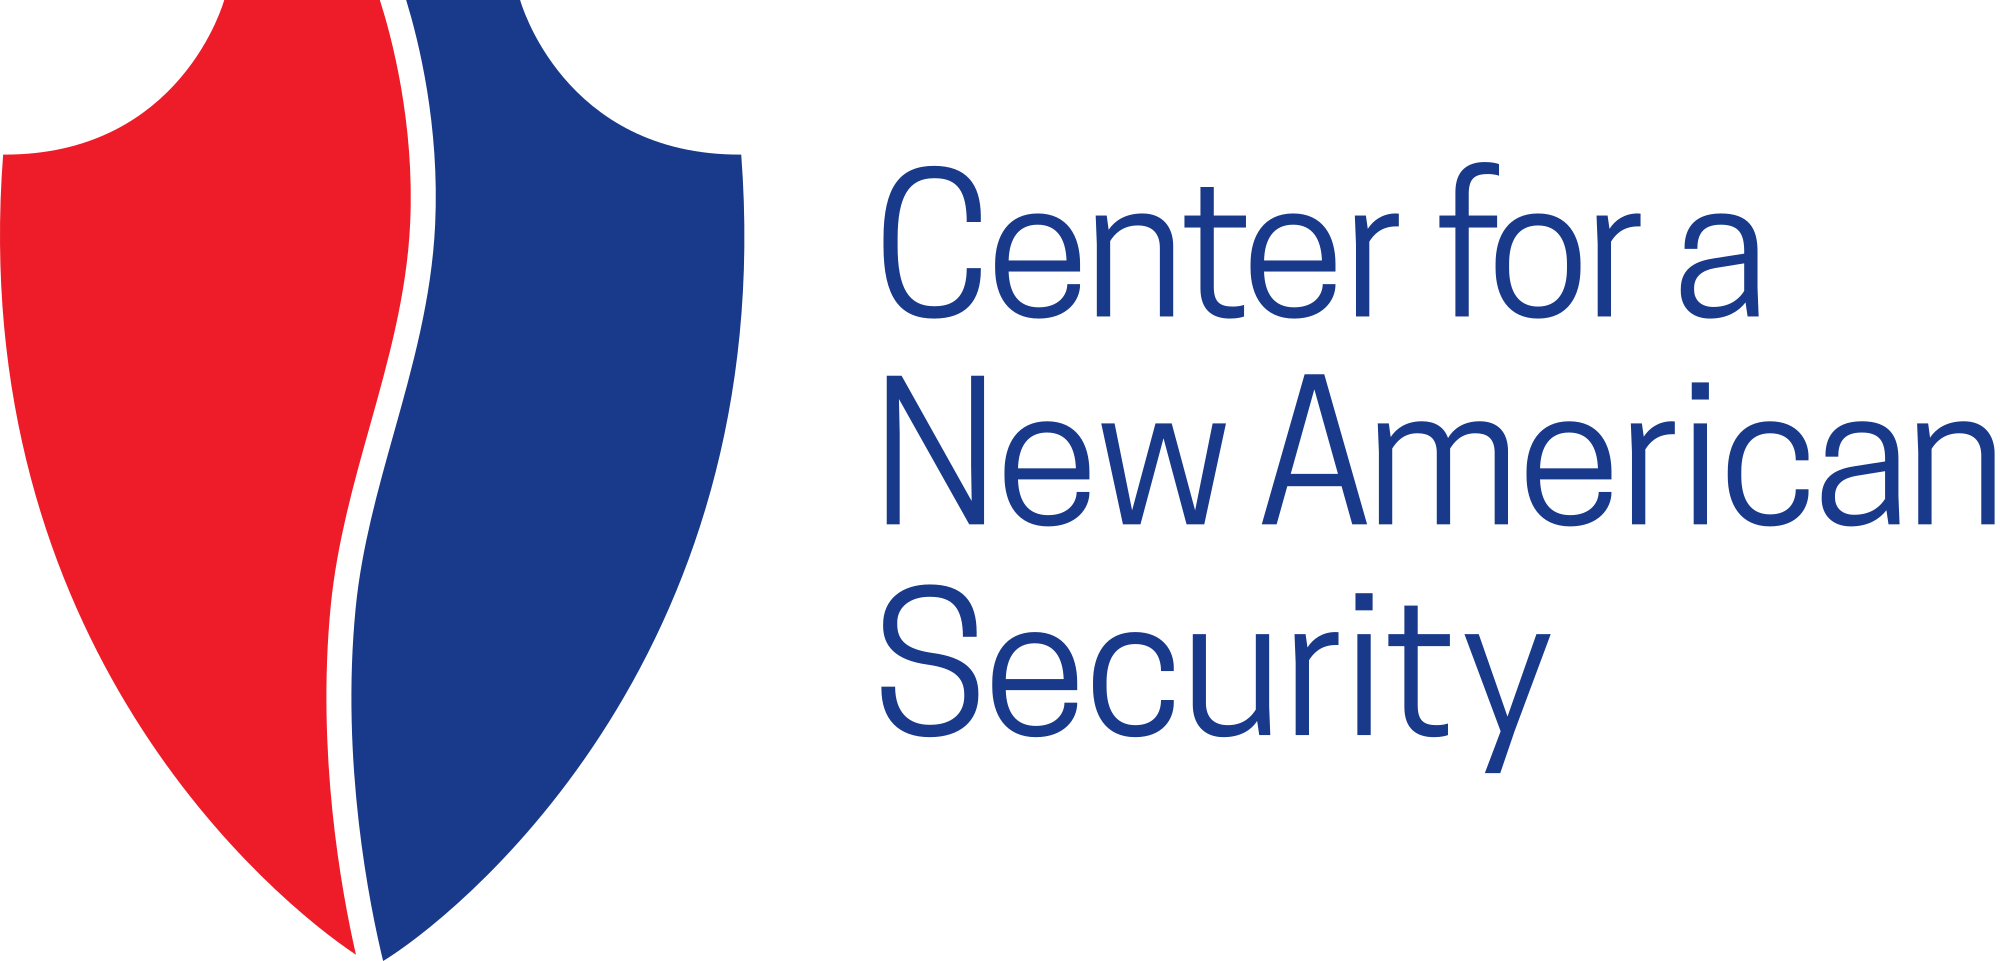 Cnas Logo - Svg - Center For A New American Security Clipart, free png down...